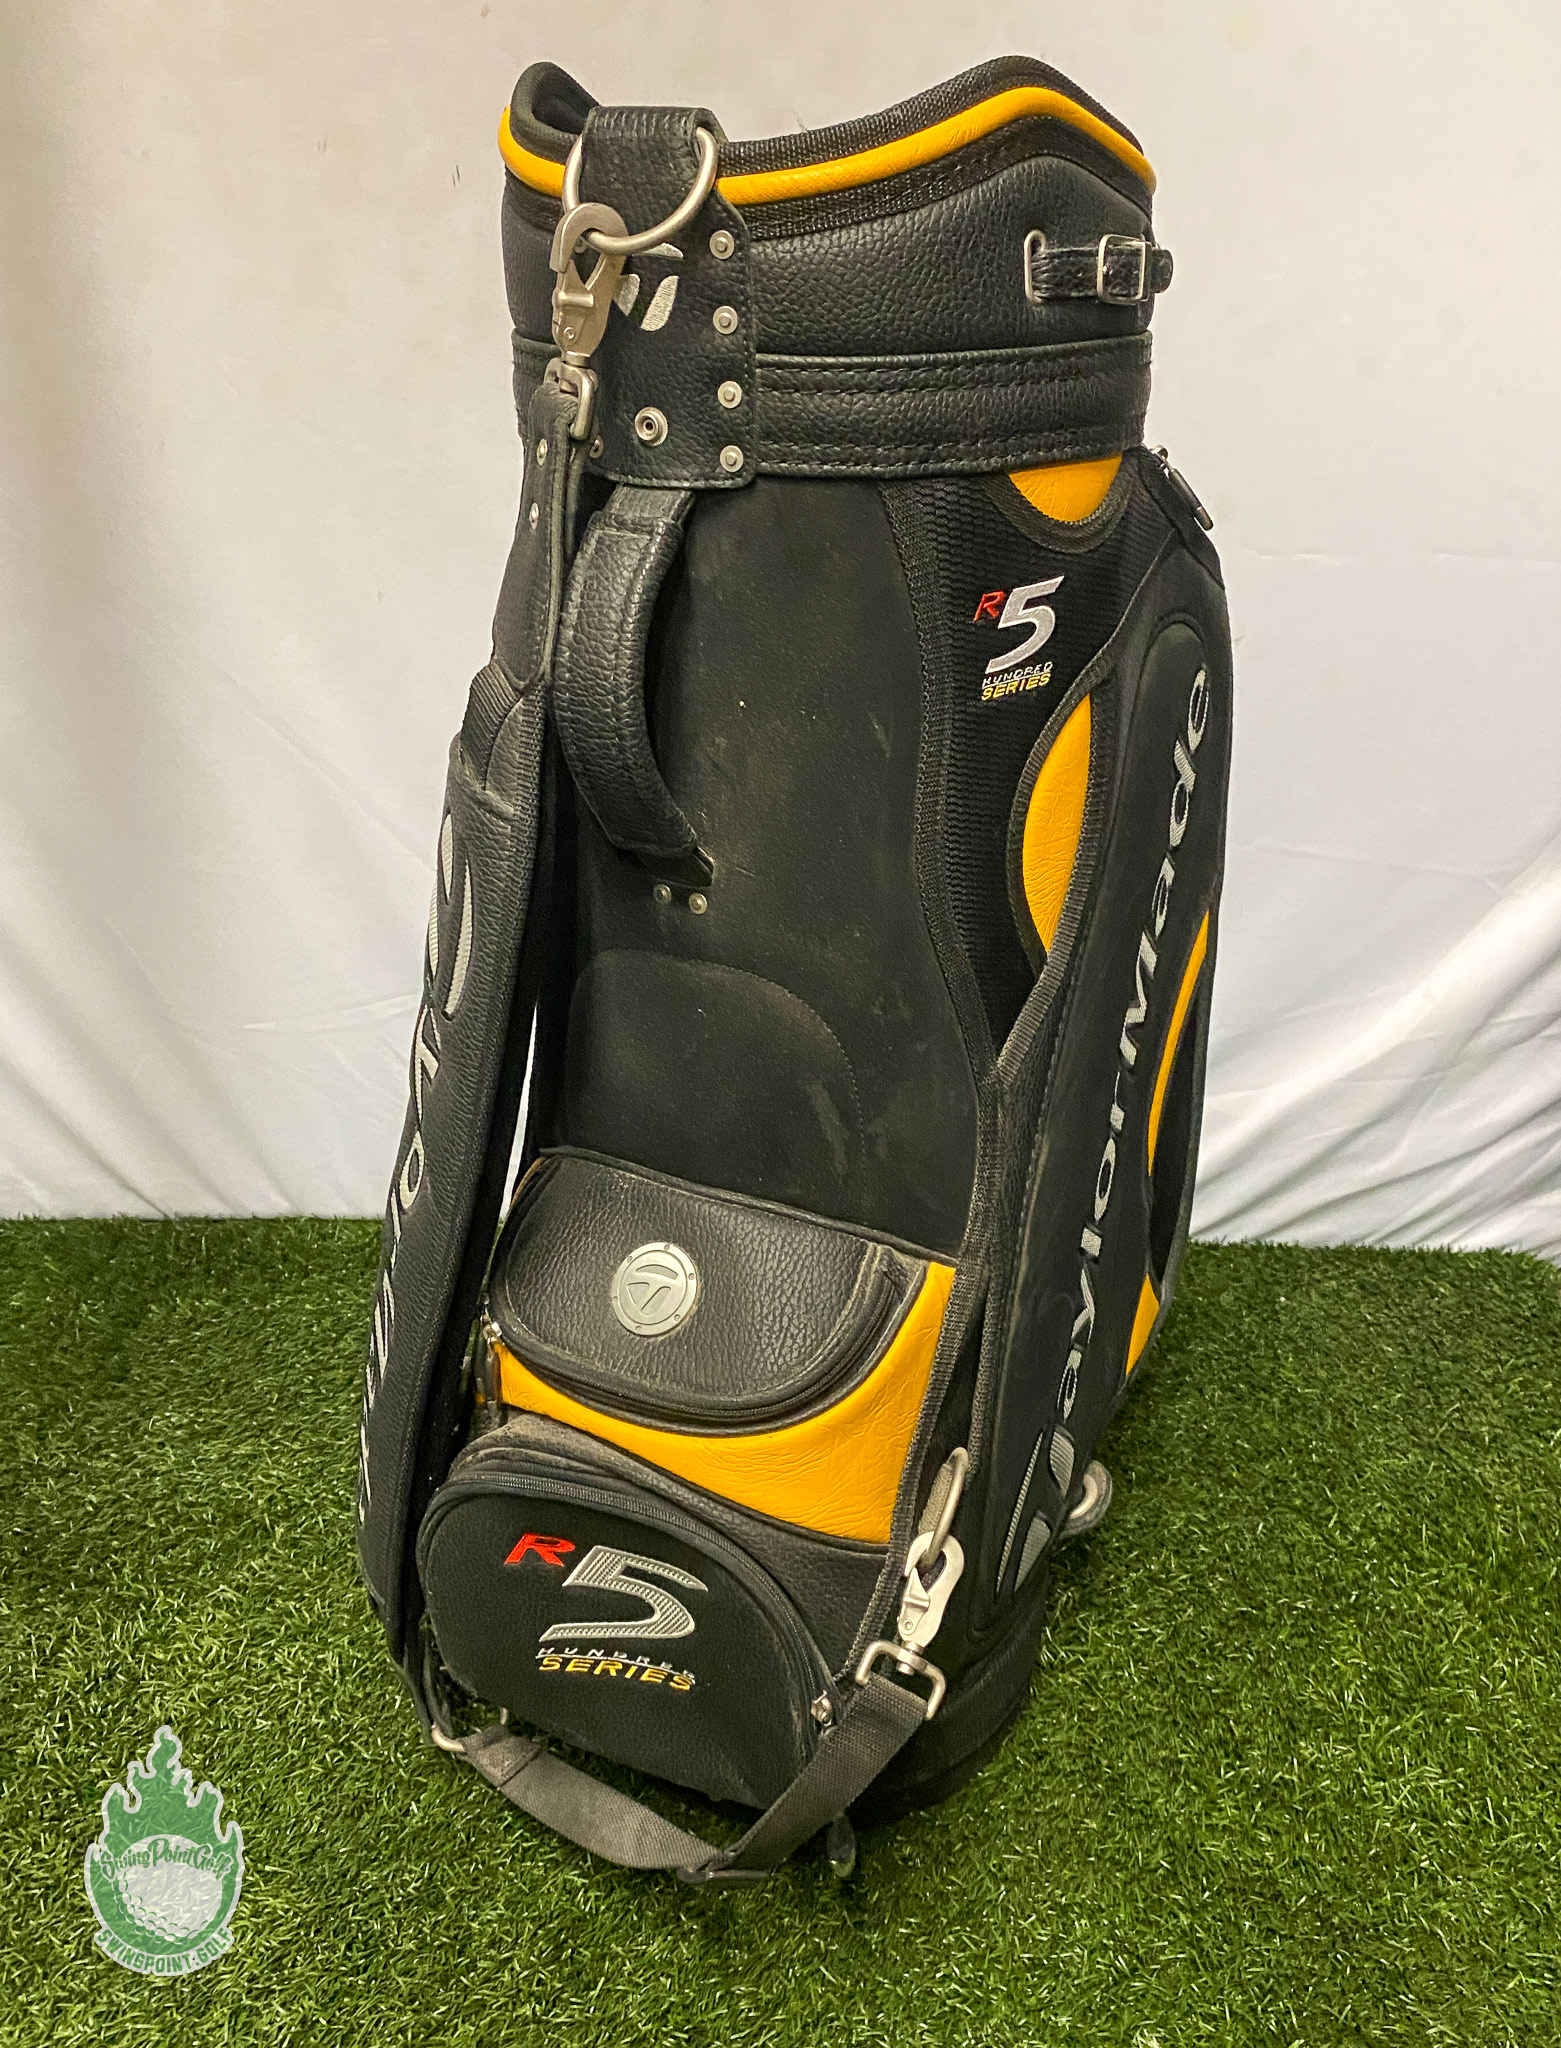 Five Retro-Style Golf Bags That Recapture the Game's Roots – Robb